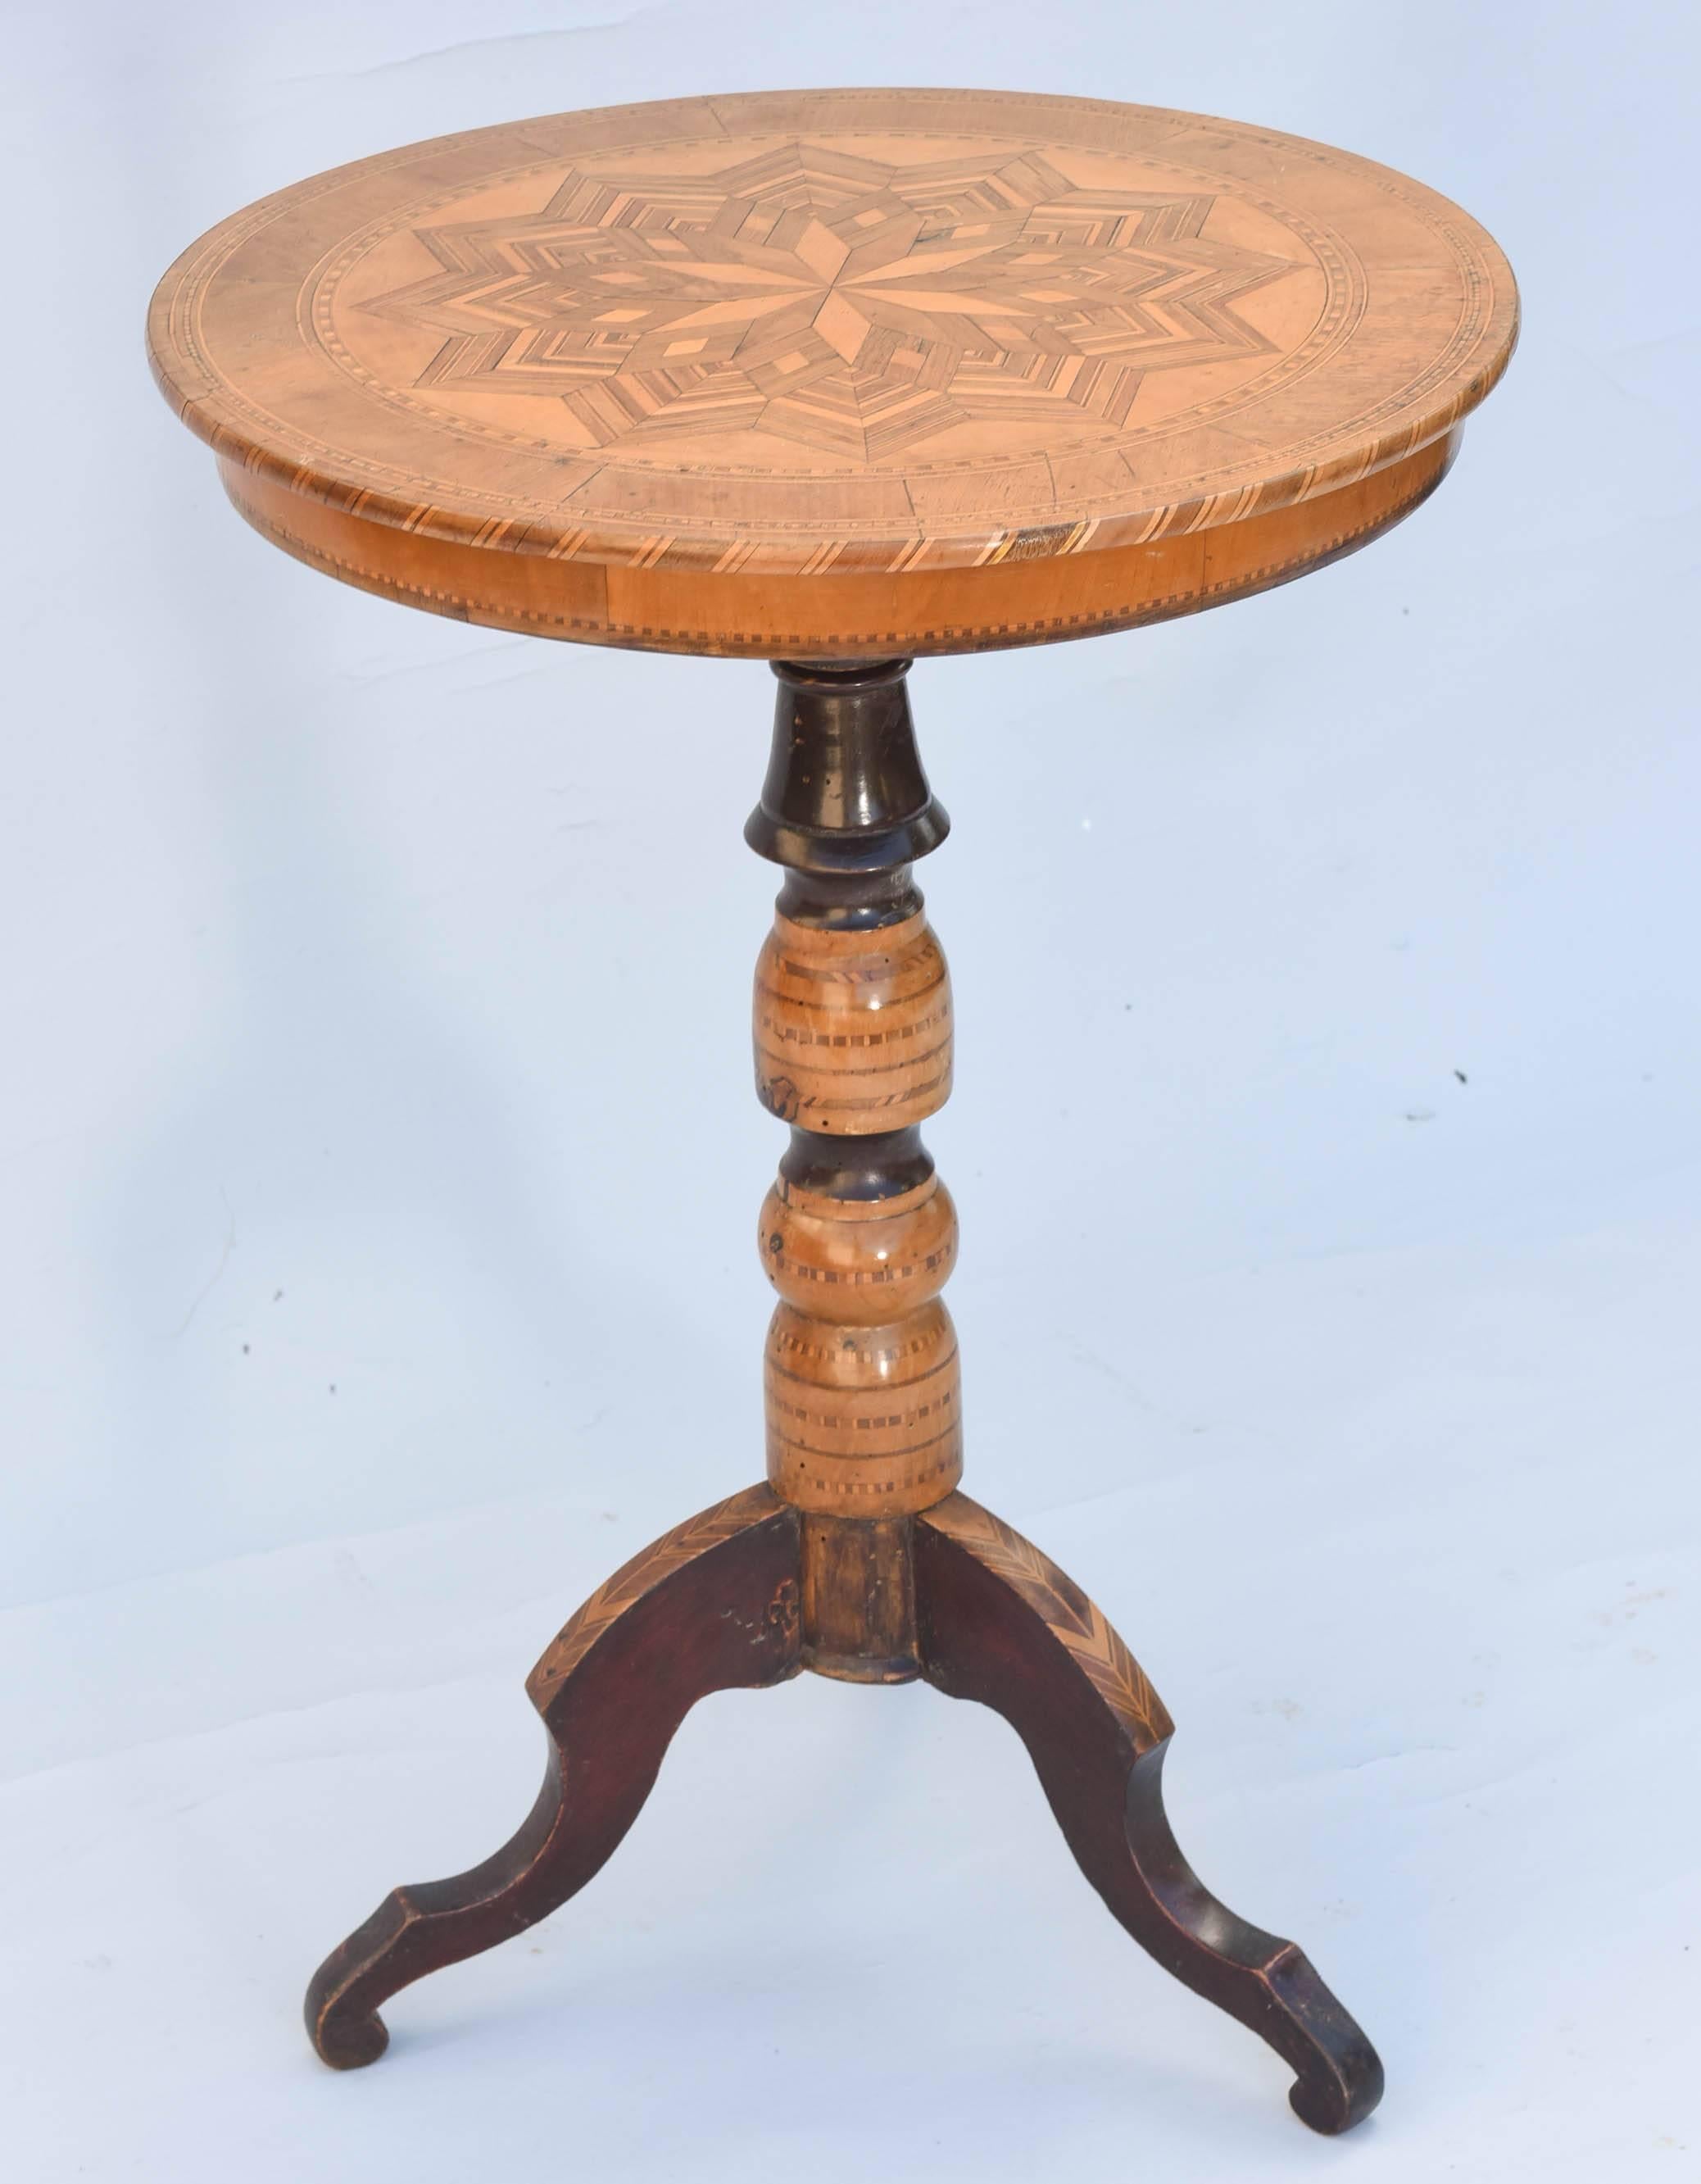 Sorrento table, having round top of beautifully inlaid parquetry of mixed woods in star pattern, raised on turned column with stringing details, on scrolling tripartite base.

Stock ID: D9258